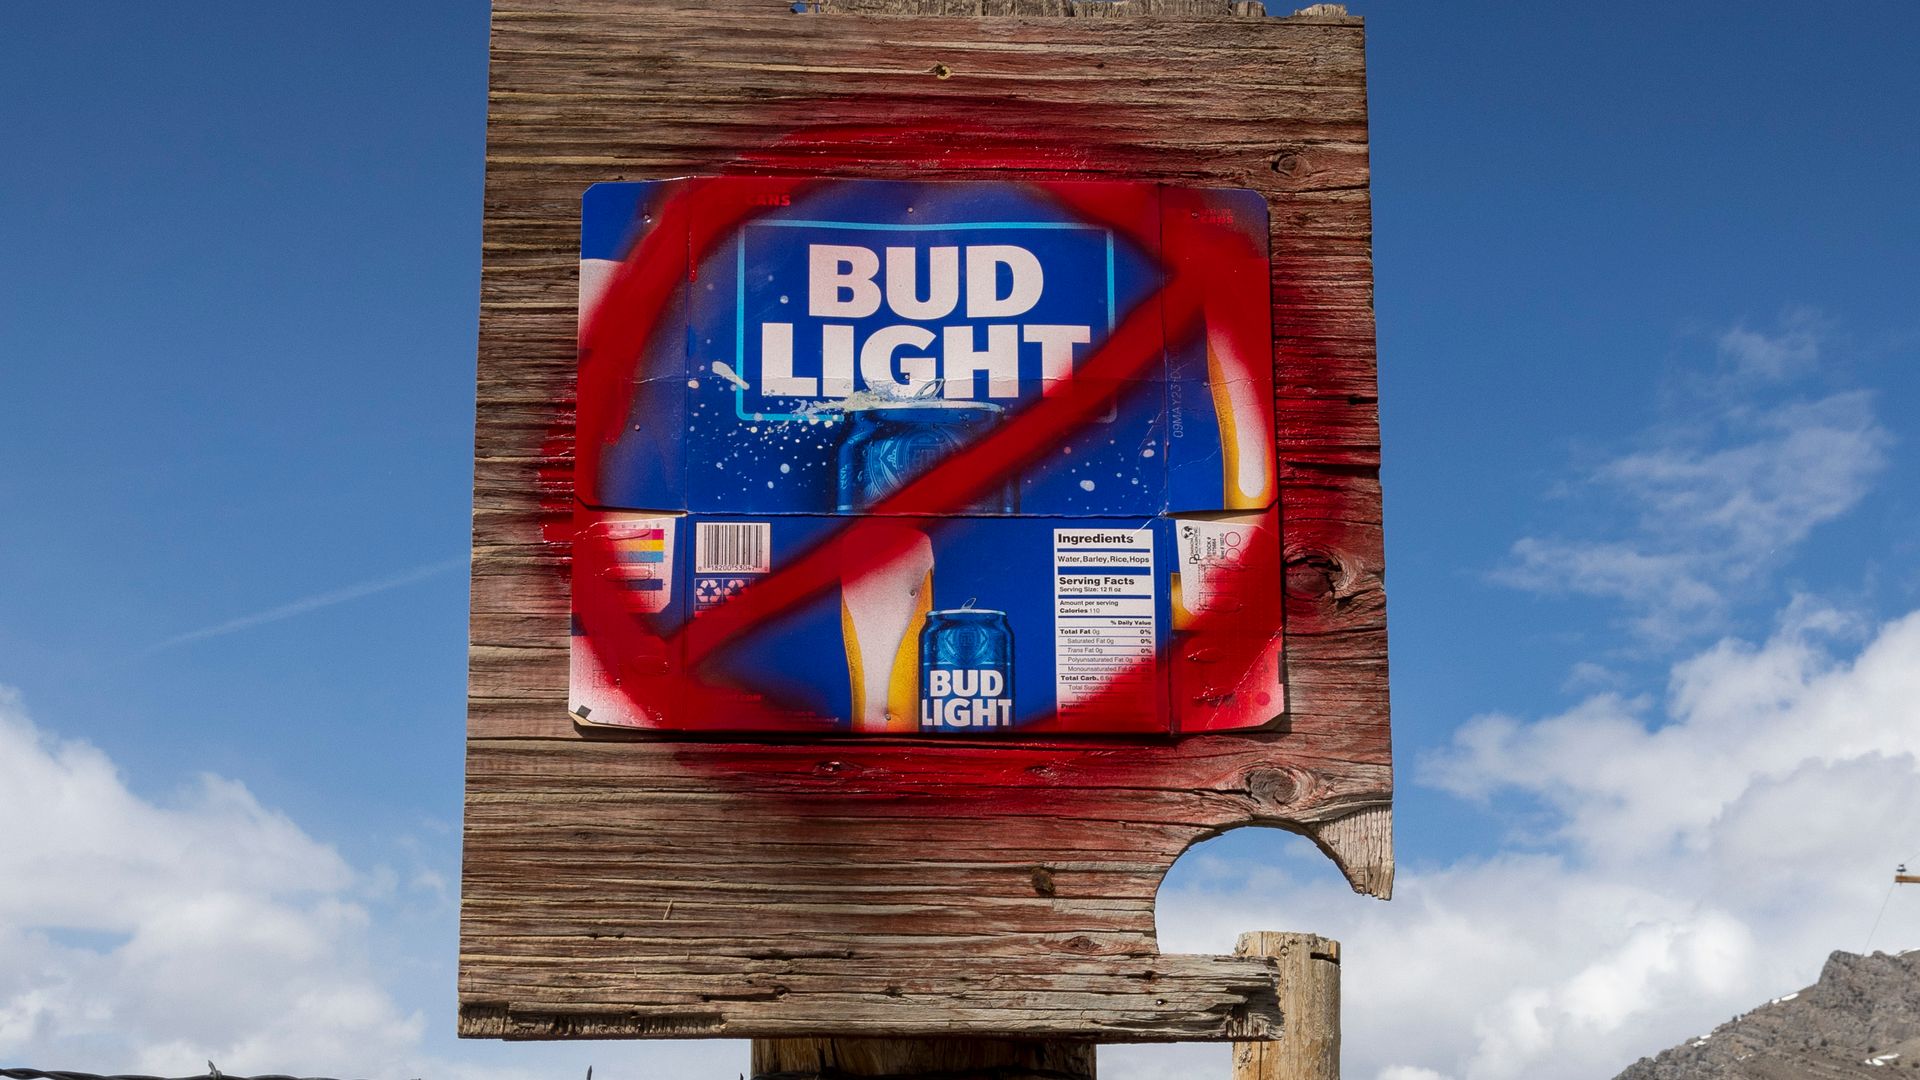 Bud Light sales continue to reach weekly lows following boycott of controversial partnership. On June 17, sales were down 28%.